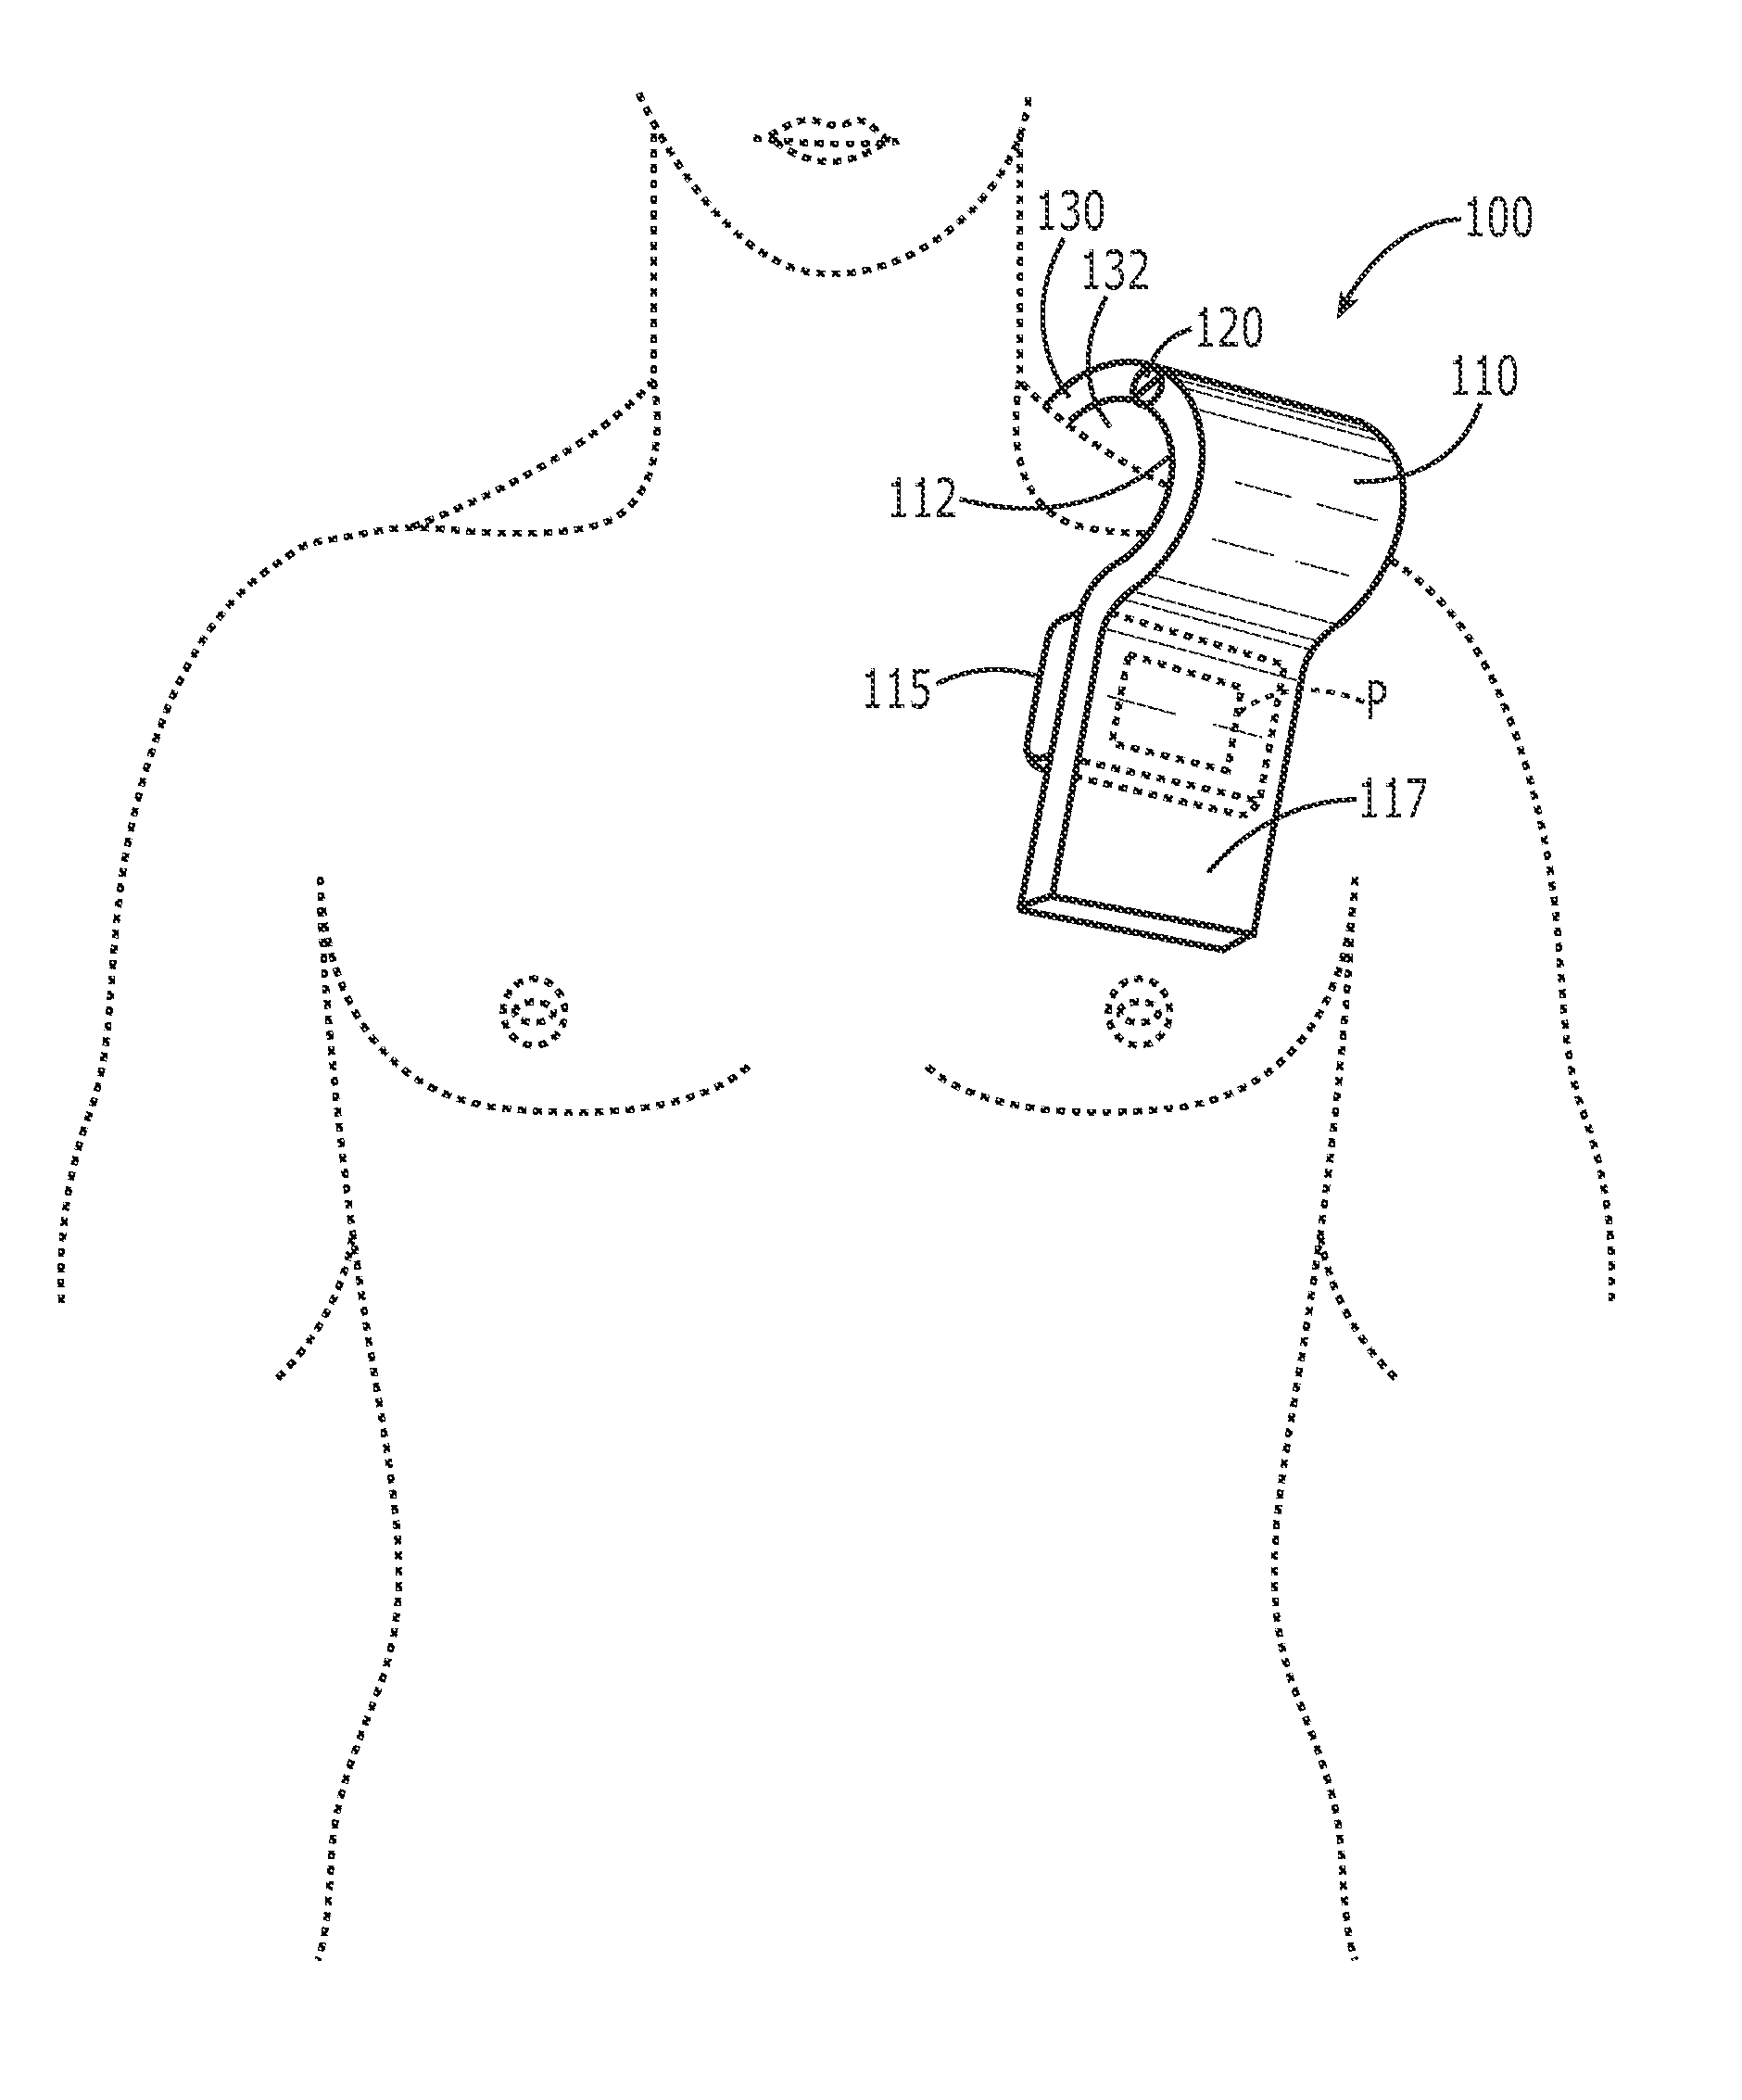 Device for applying pressure to a pocket to prevent hematoma after surgical implantation of medical device and method of using the same